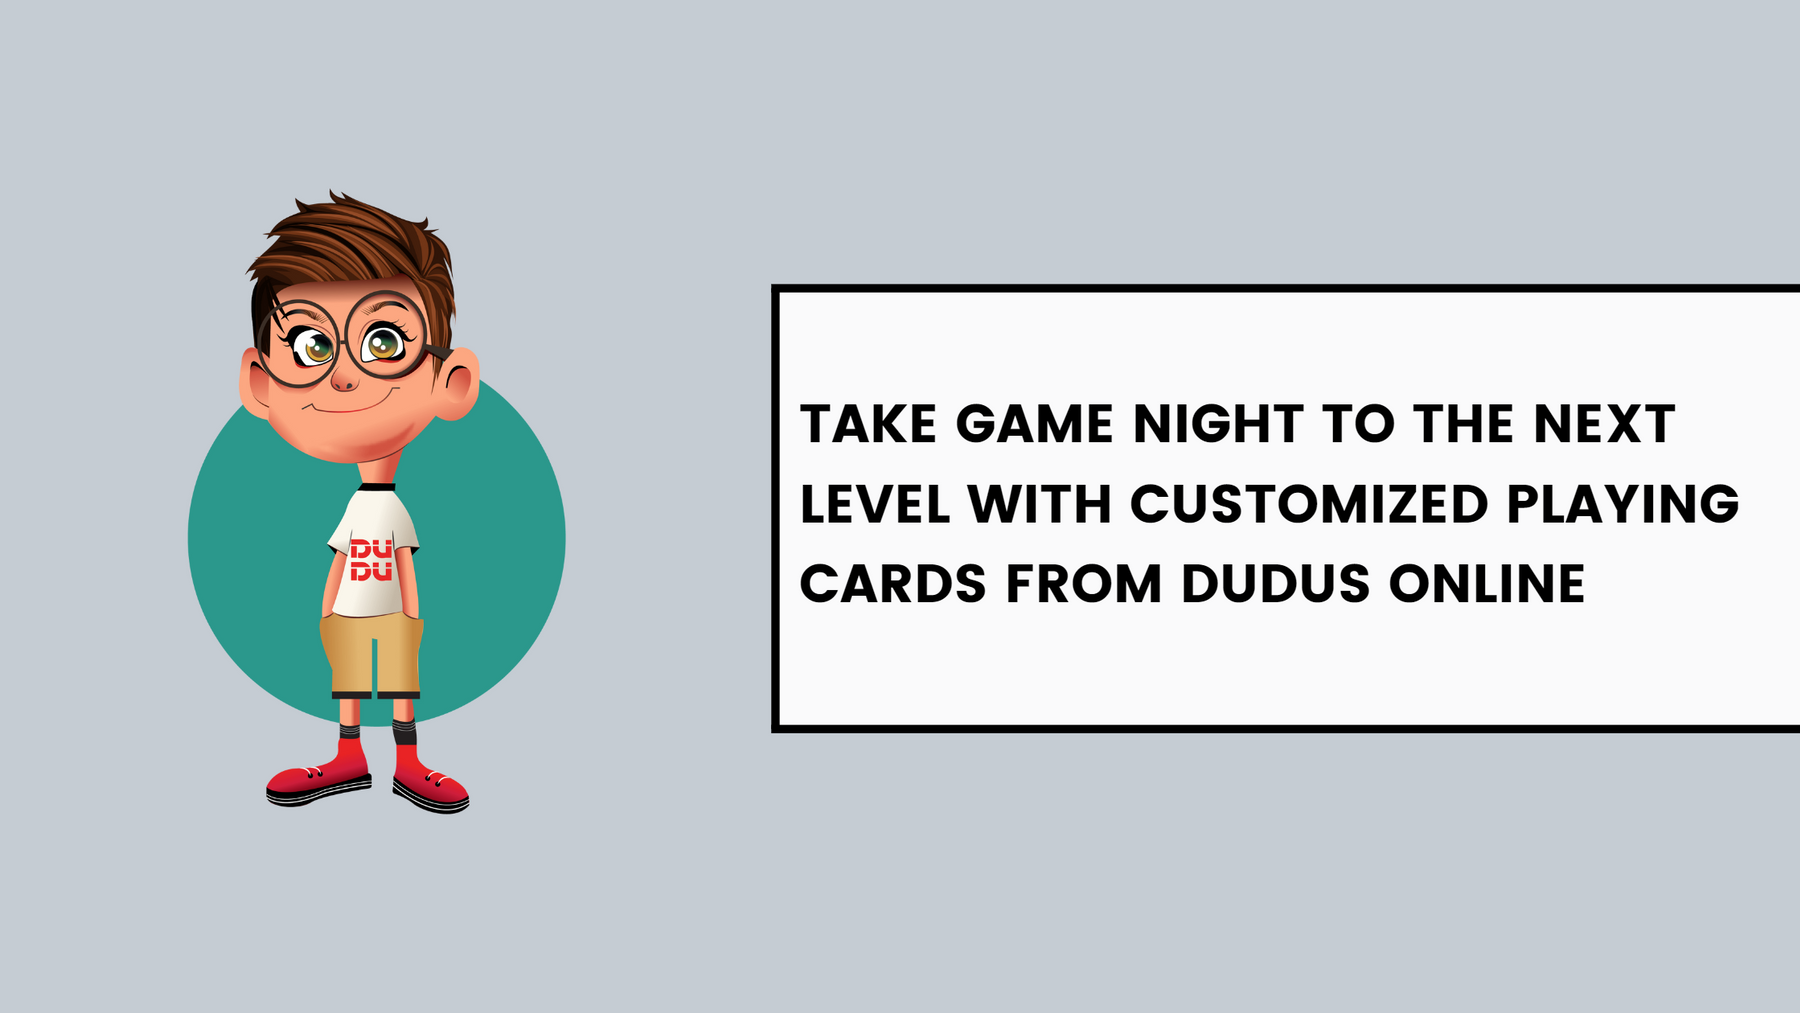 Take Game Night To The Next Level With Customized Playing Cards From Dudus Online